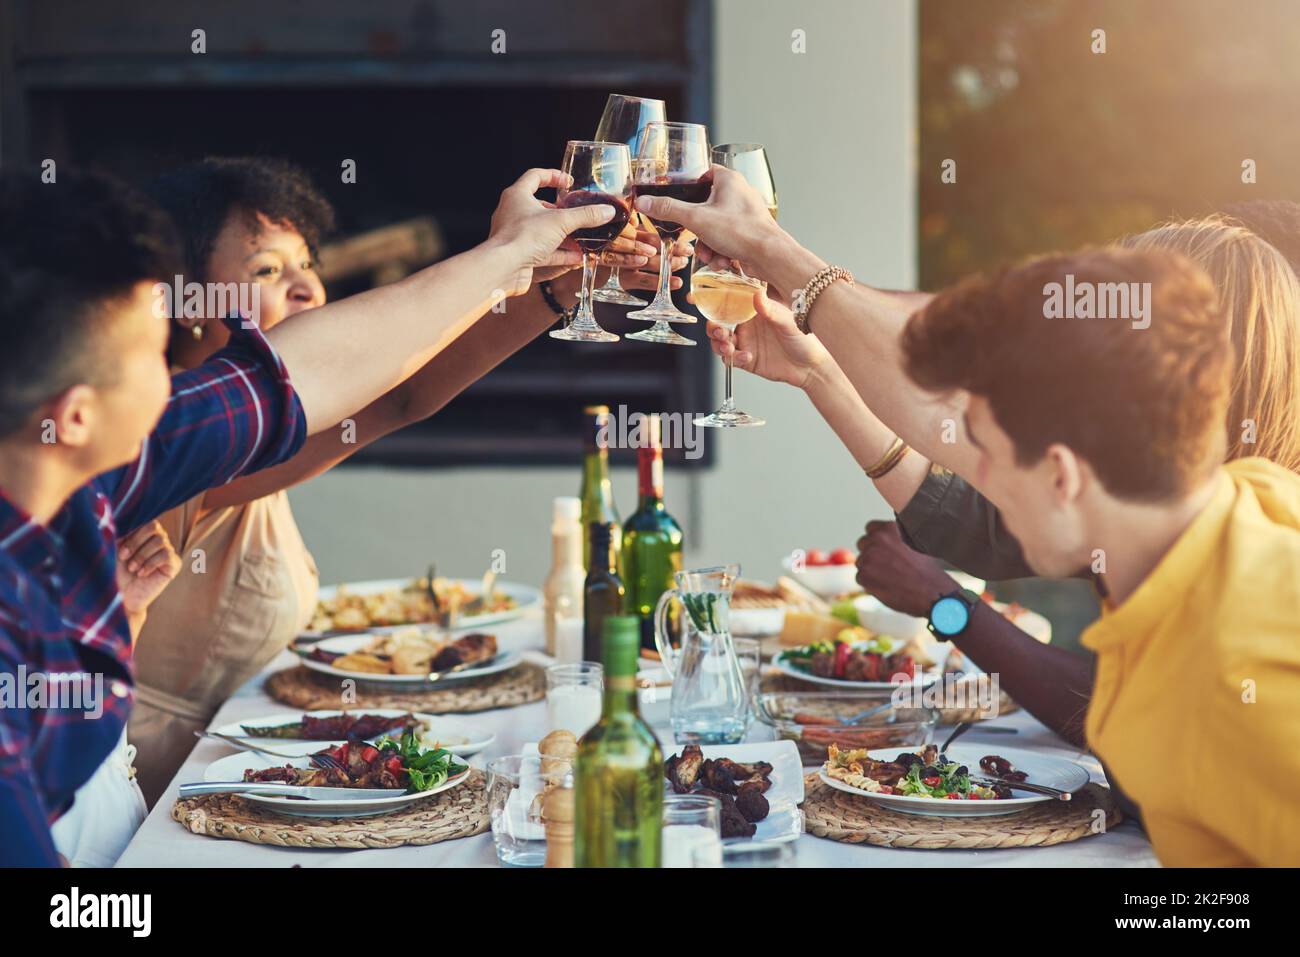 Sharing a toast with the best company in the world. Shot of a group of friends raising up their glasses for a toast while sitting around a table together outdoors. Stock Photo